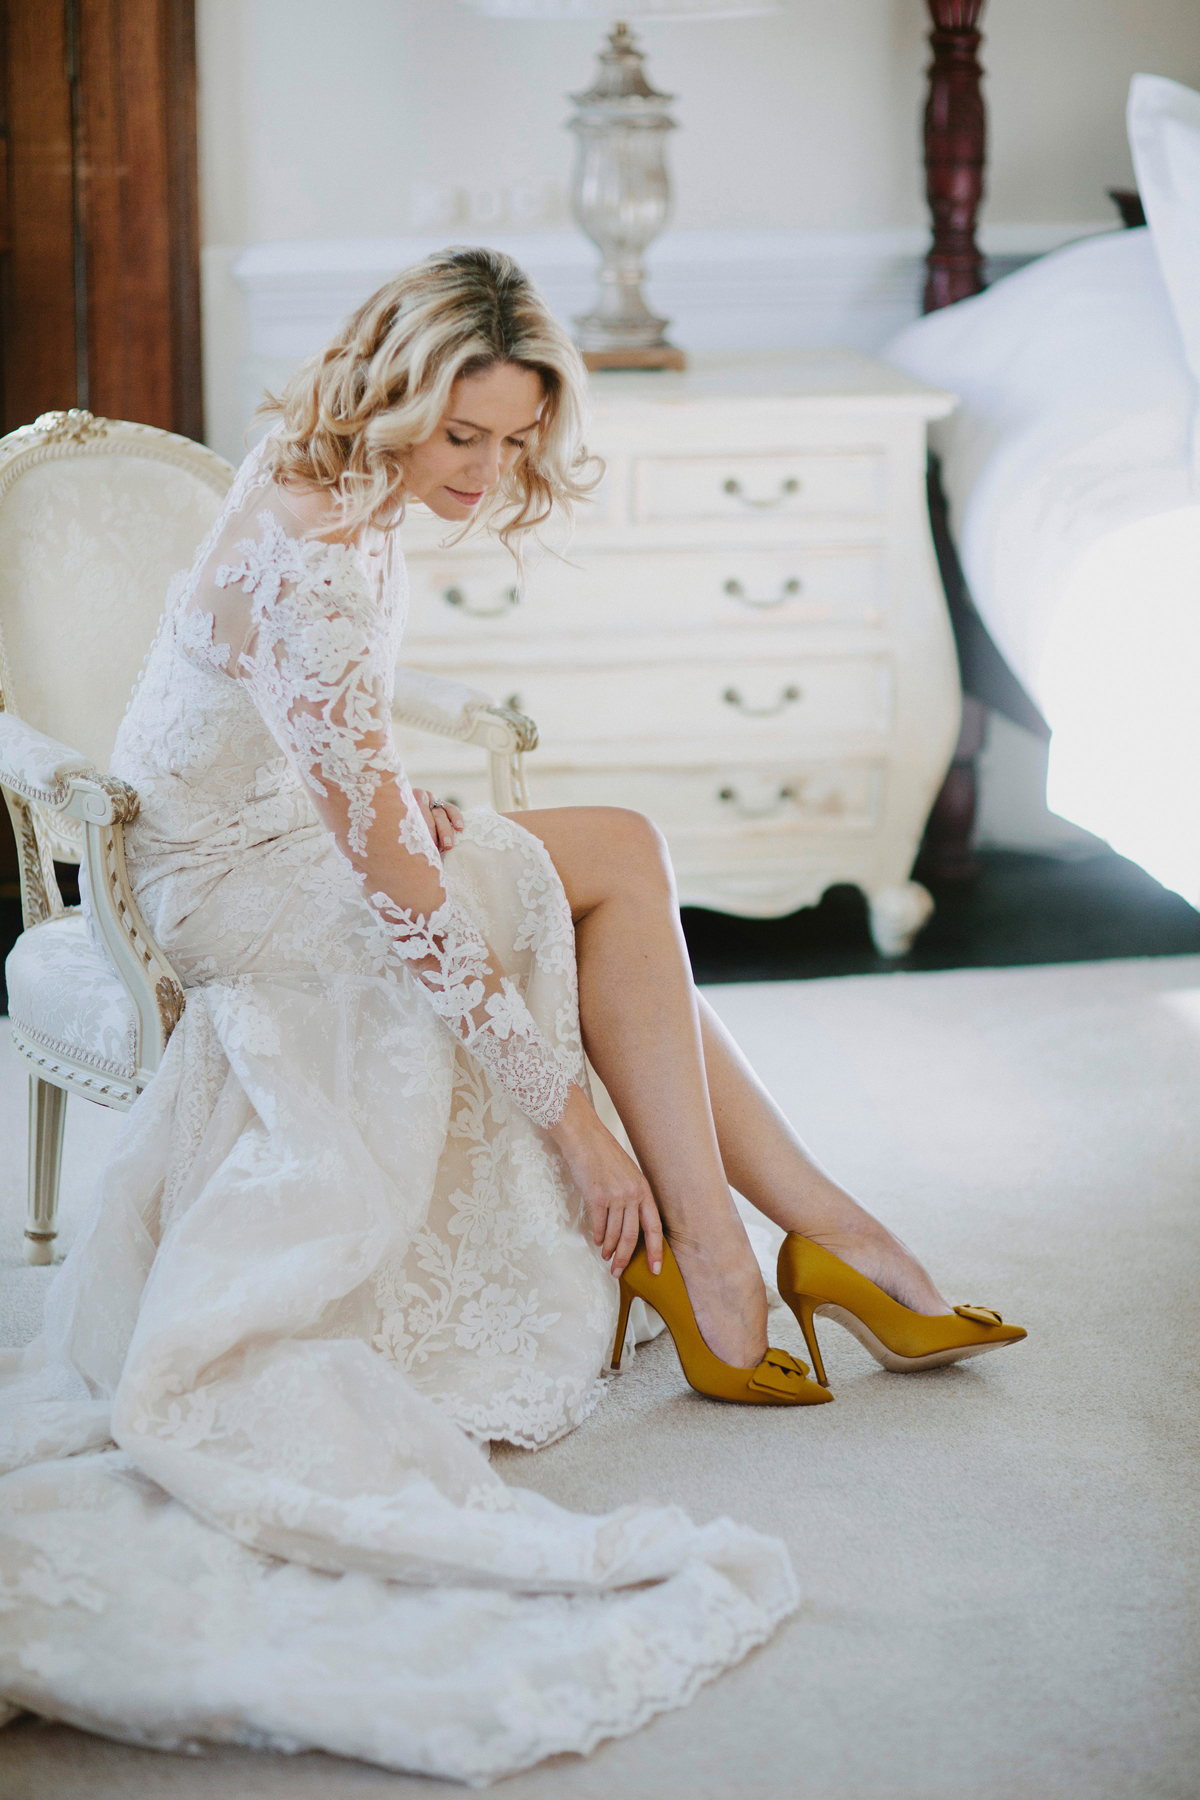 Pronovias worn by a beautiful mature bride with yellow shoes